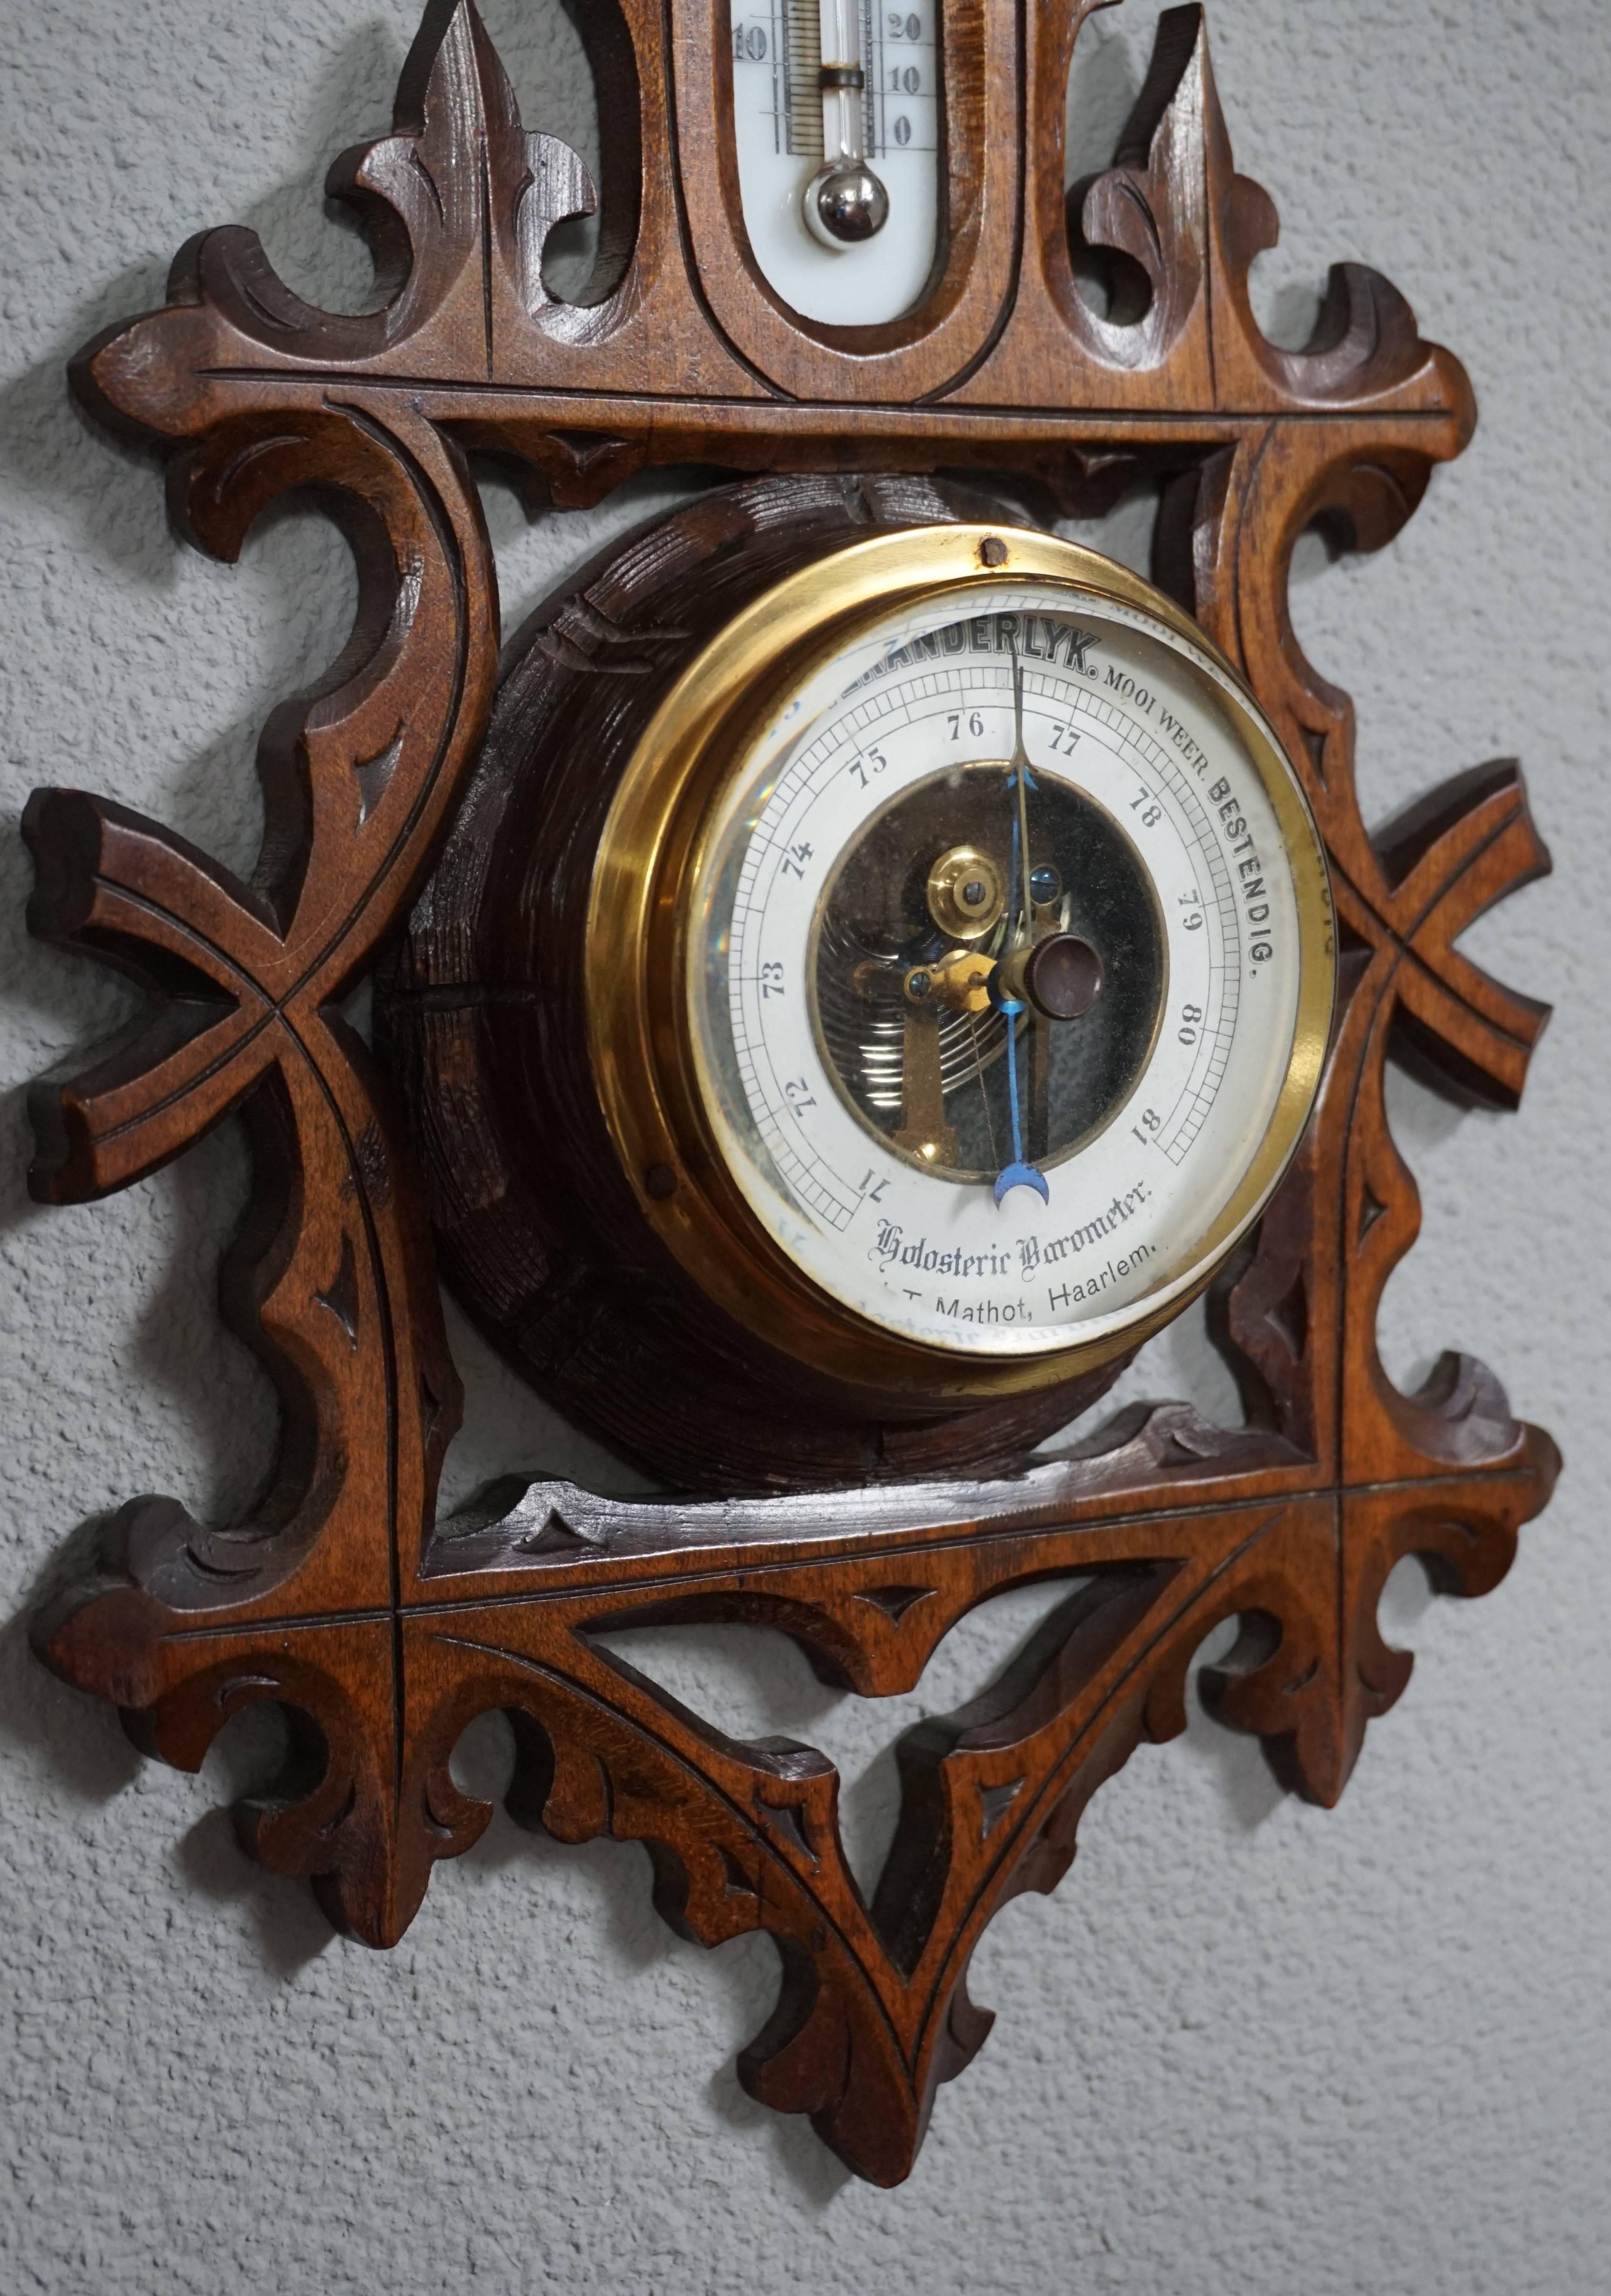 Dutch Antique Hand-Carved Gothic Revival Barometer & Thermometer w. Trefoil Symbol For Sale